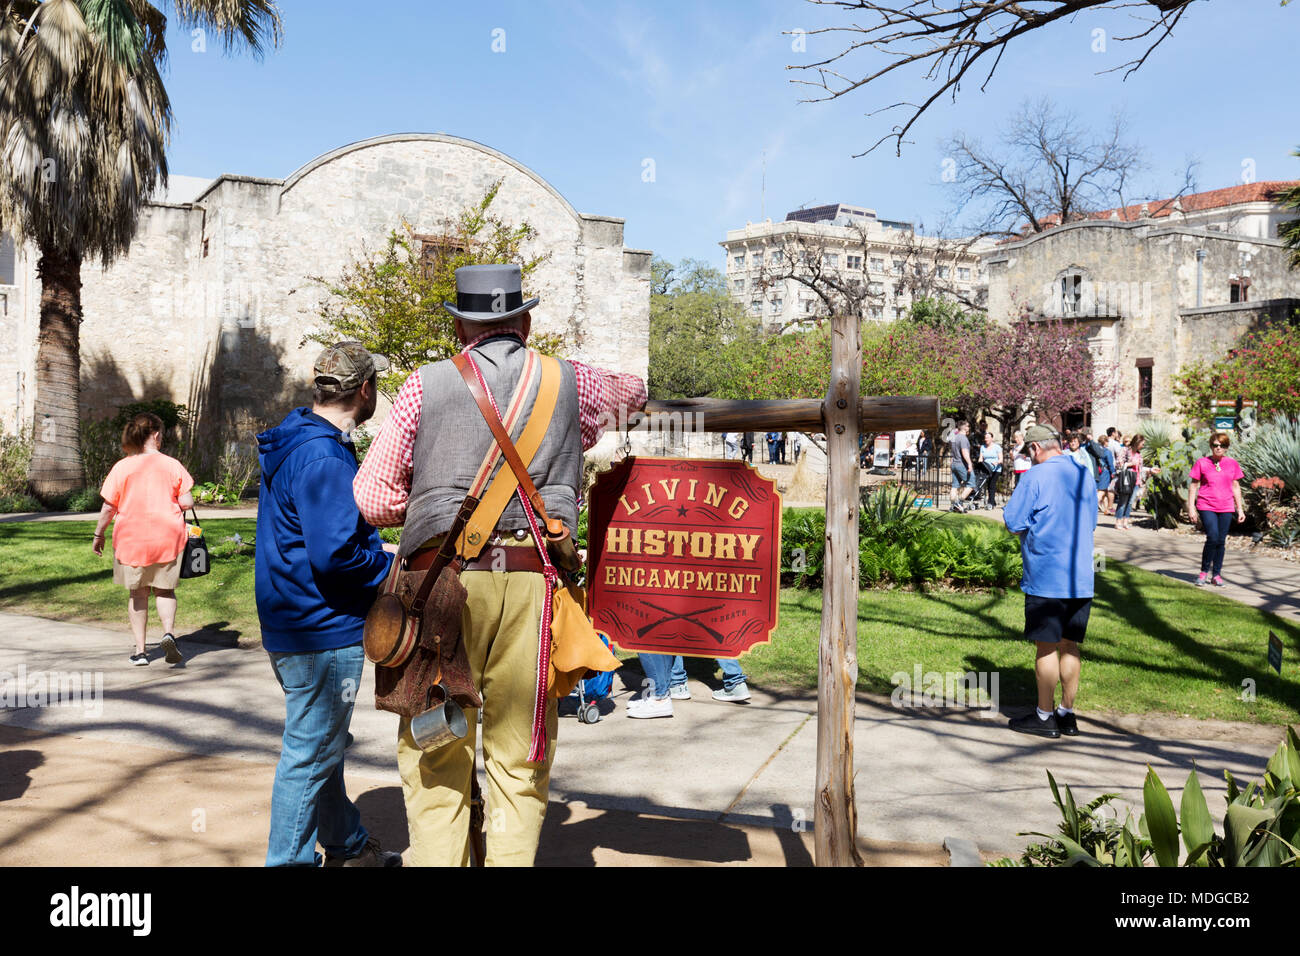 Tourists learning about the Battle of the Alamo at the Living History Encampment, Alamo Mission Museum, San Antonio, Texas United States of America Stock Photo